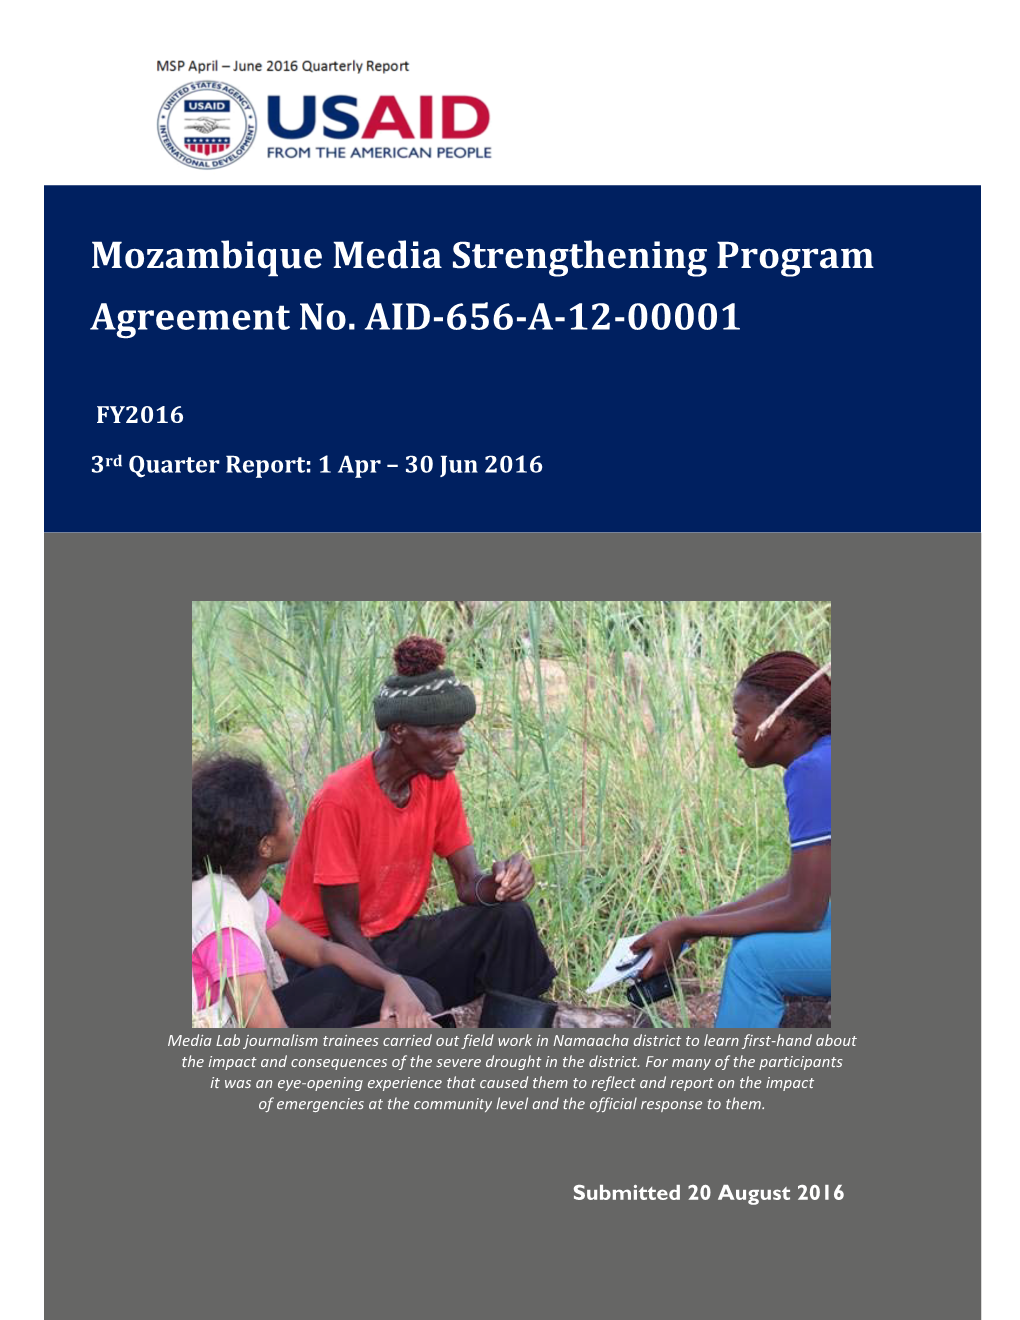 Mozambique Media Strengthening Program Agreement No. AID-656-A